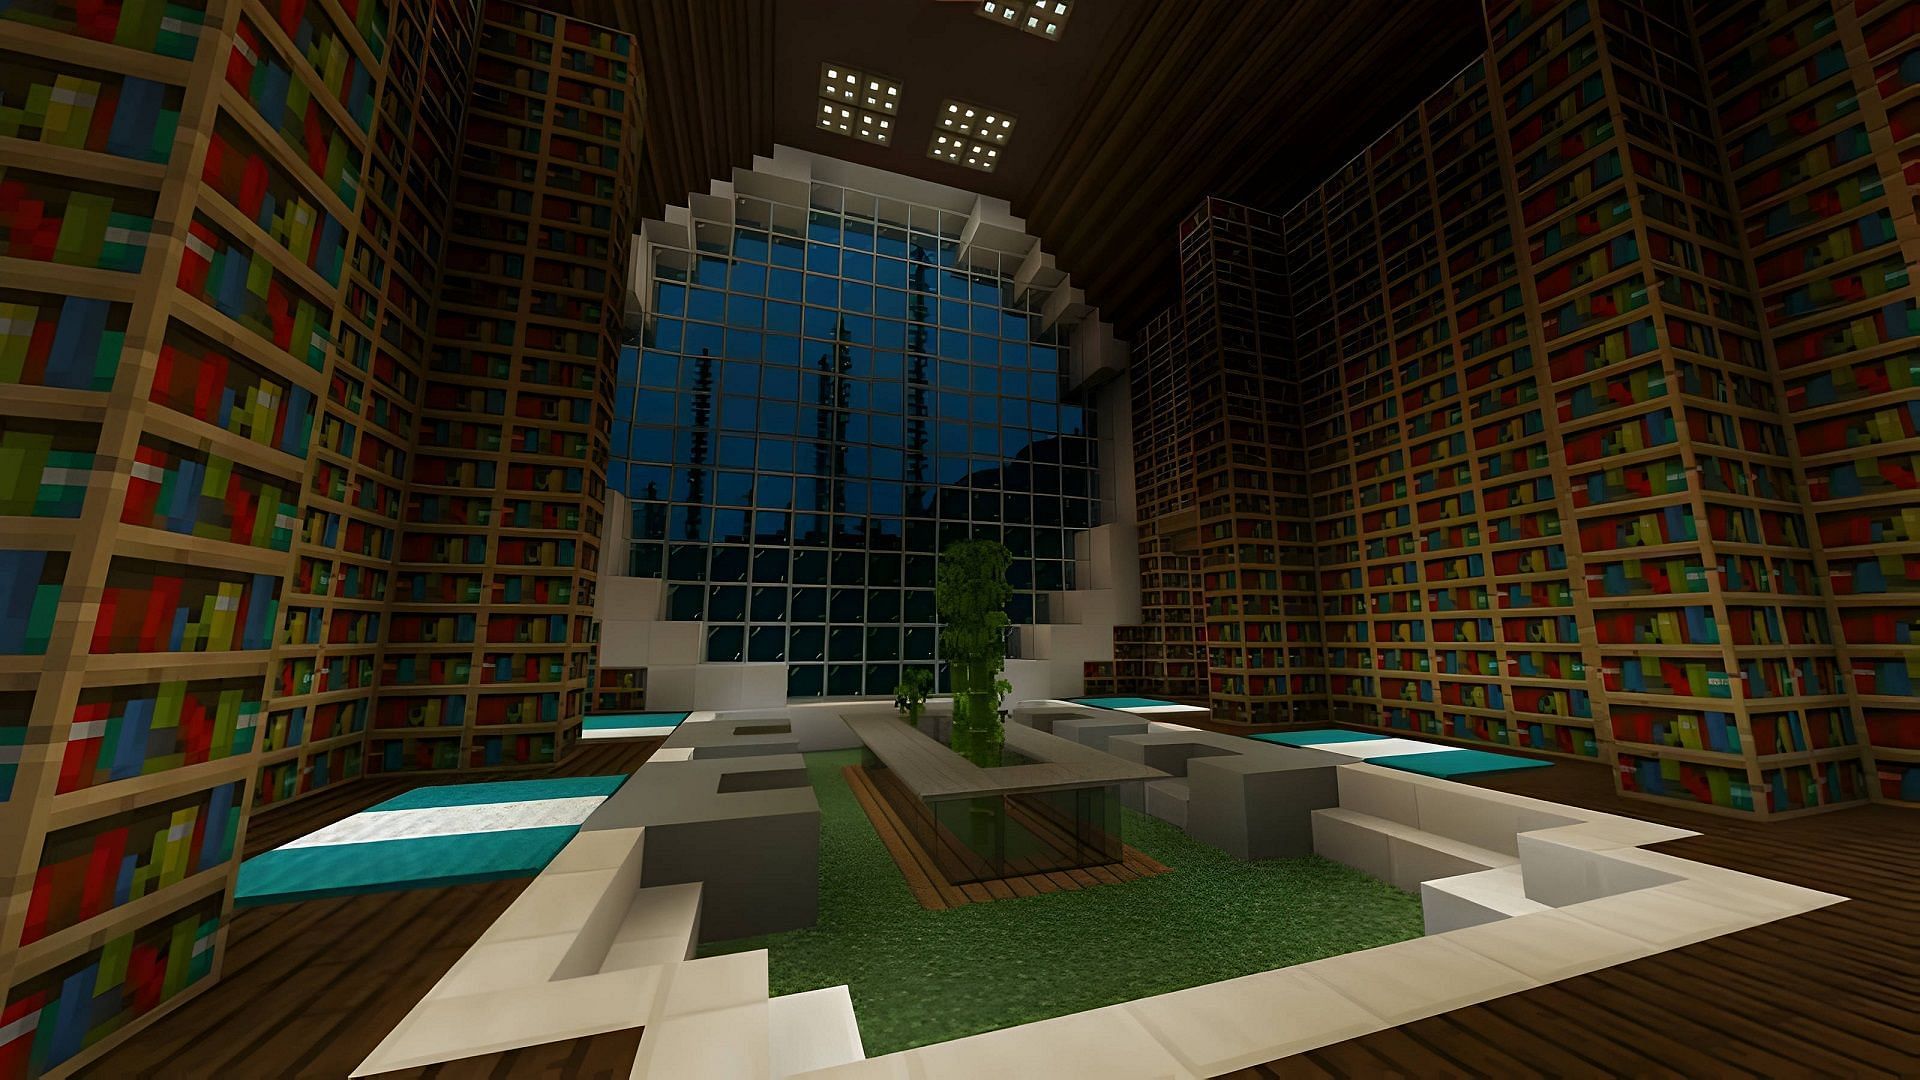 Underwater bases make for great Minecraft homes if players are willing to build them (Image via Mojang)